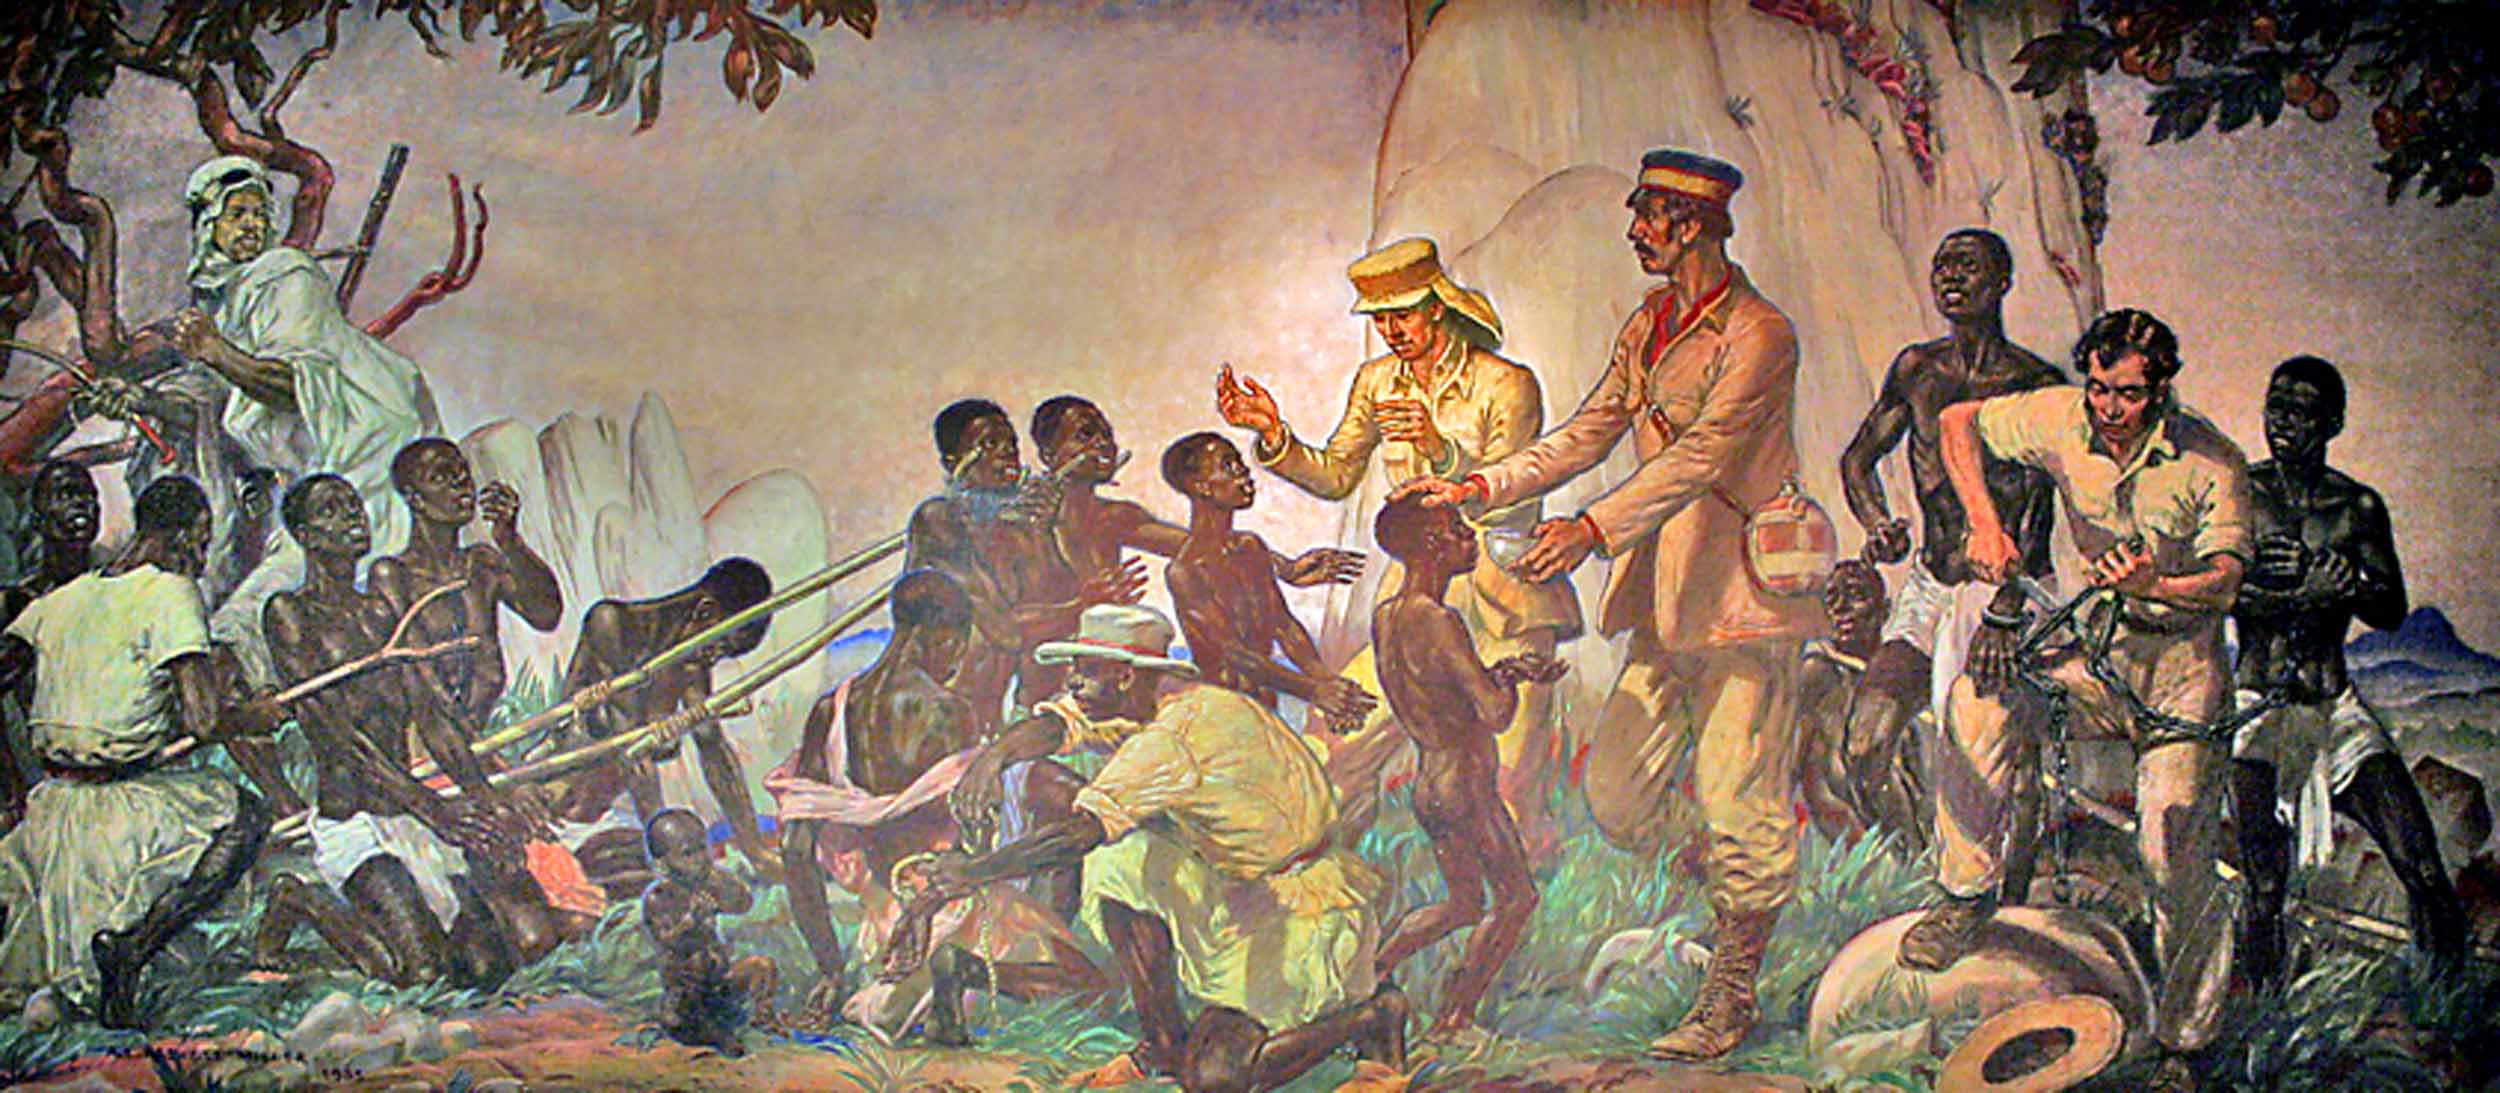 Livingstone, the Liberator. Copyright Livingstone Online. May not be reproduced without the express written consent of the National Trust for Scotland, on behalf of the Scottish National Memorial to David Livingstone Trust (David Livingstone Centre).